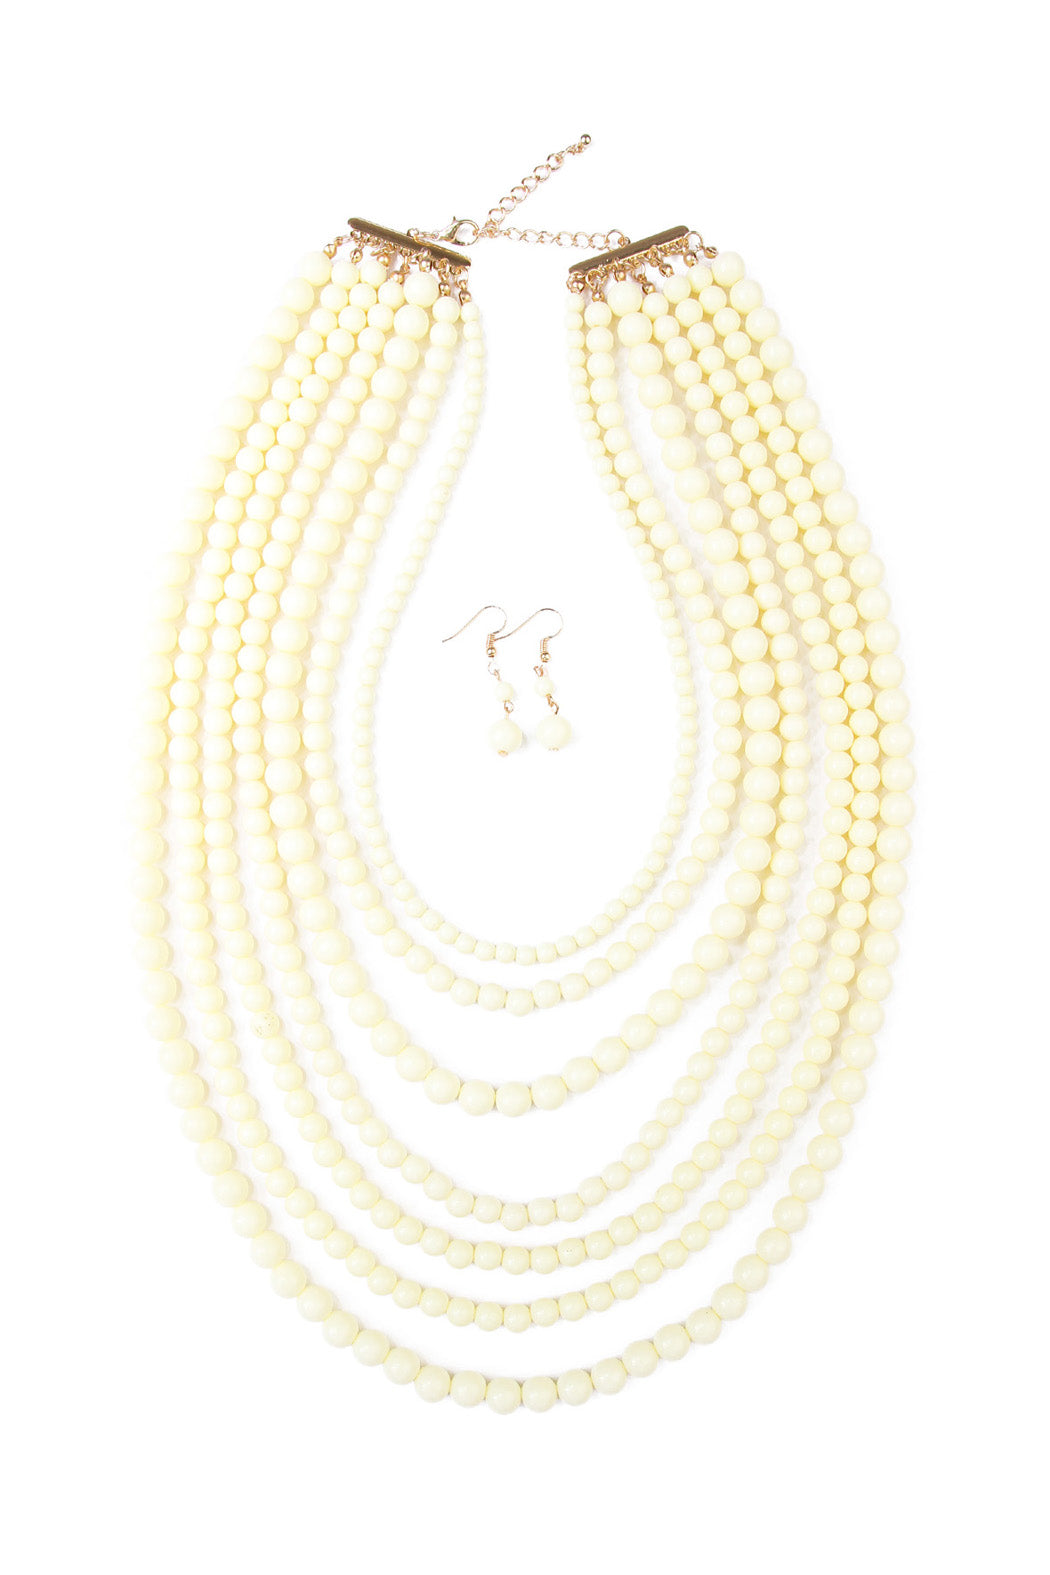 MULTILAYER ACRYLIC NECKLACE & EARRING SET